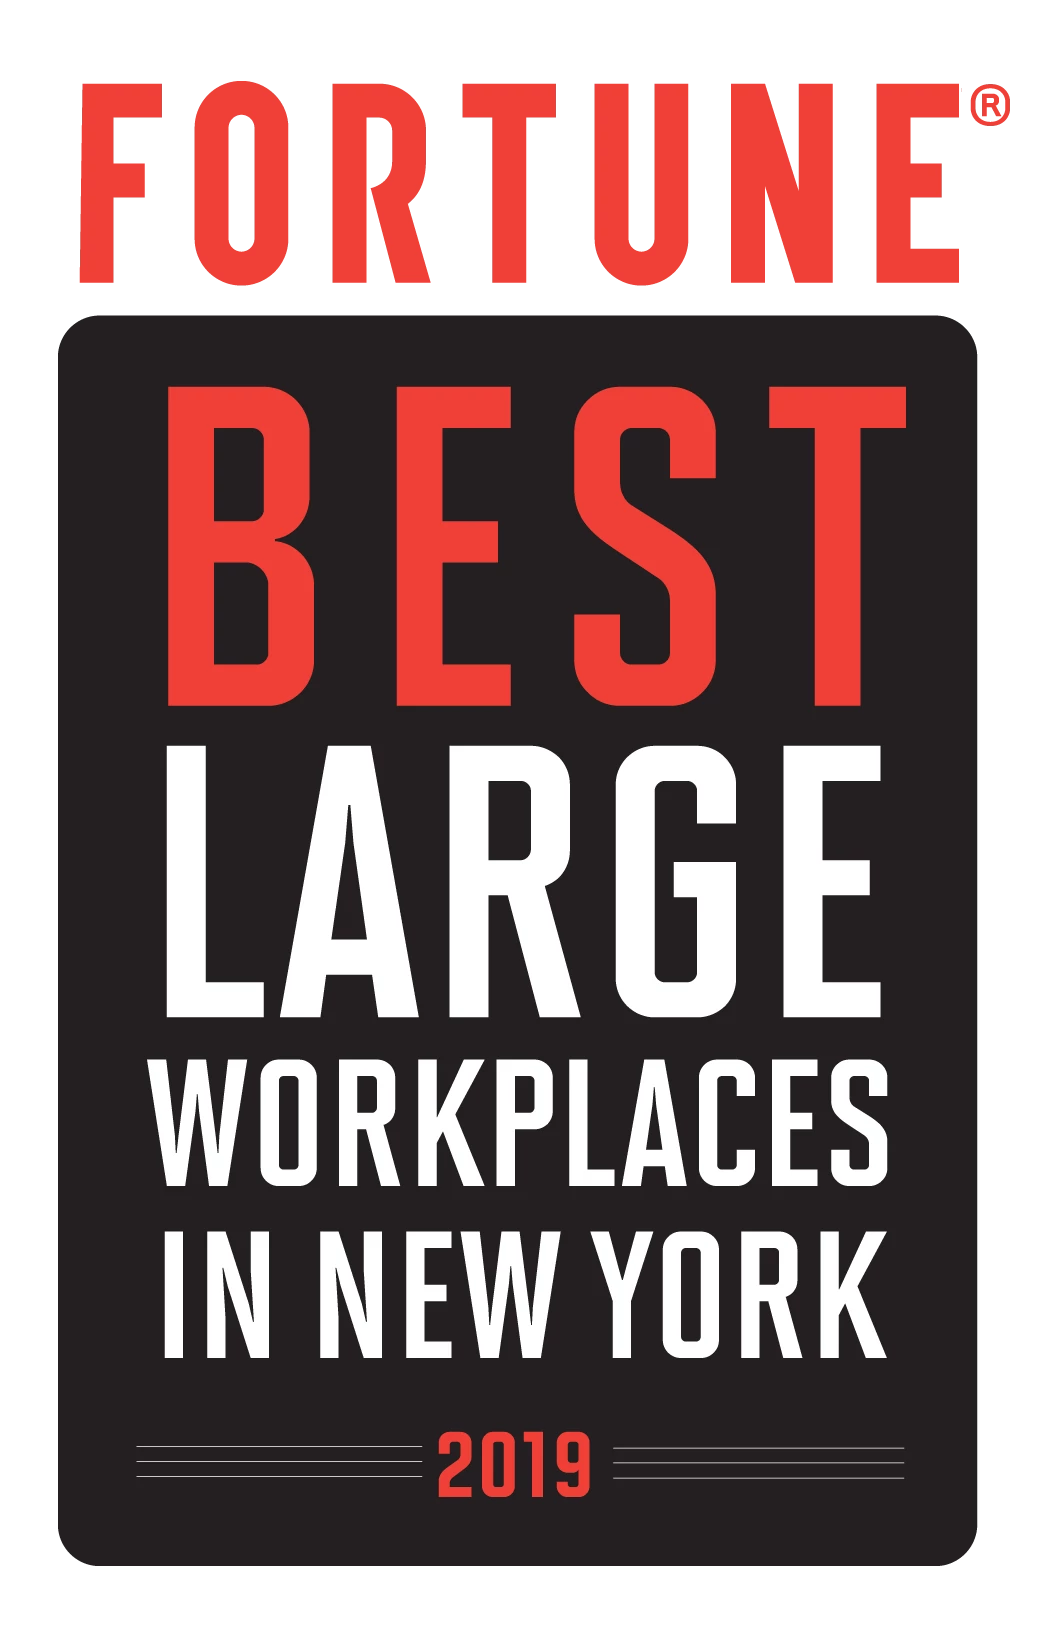 Best Large Workplace in New York